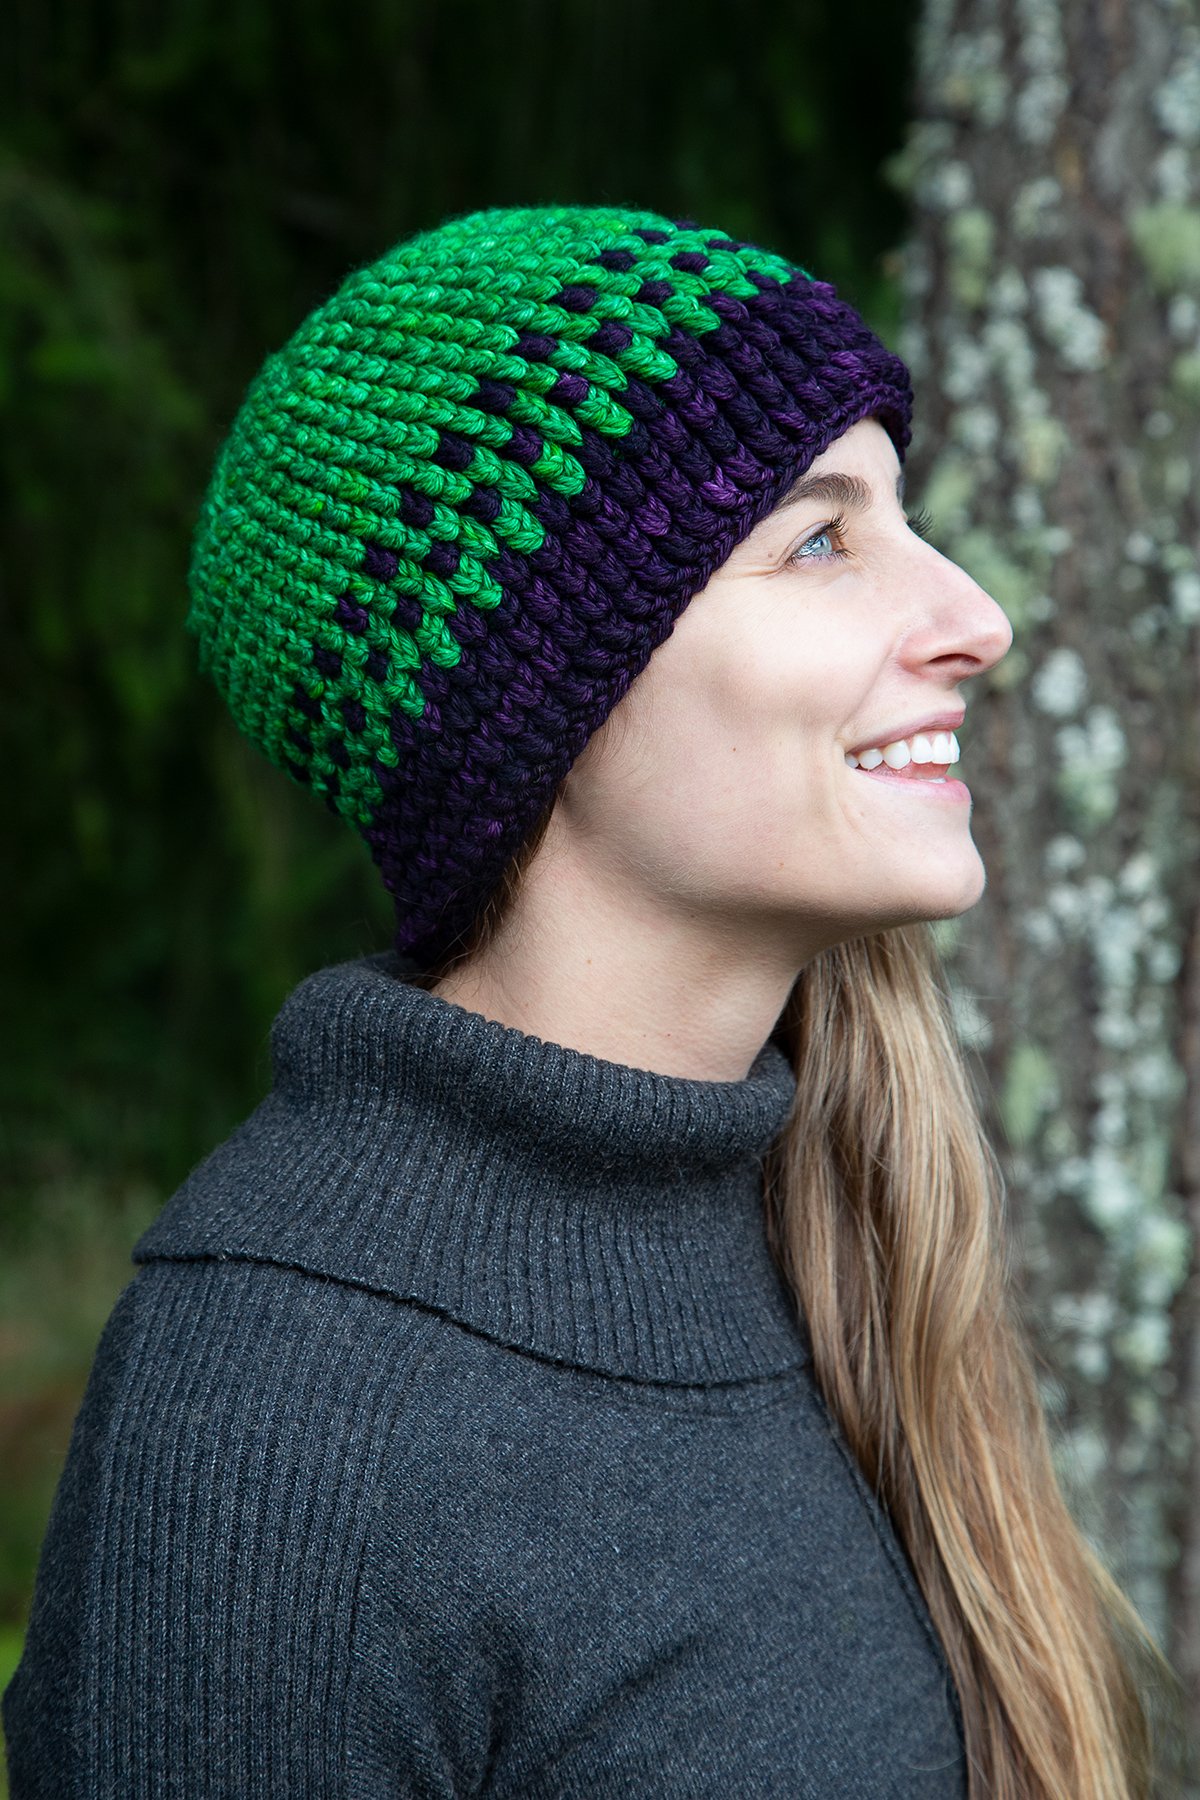 A woman smiles and looks upwards while wearing the green and purple Yarn Dragon Beanie.